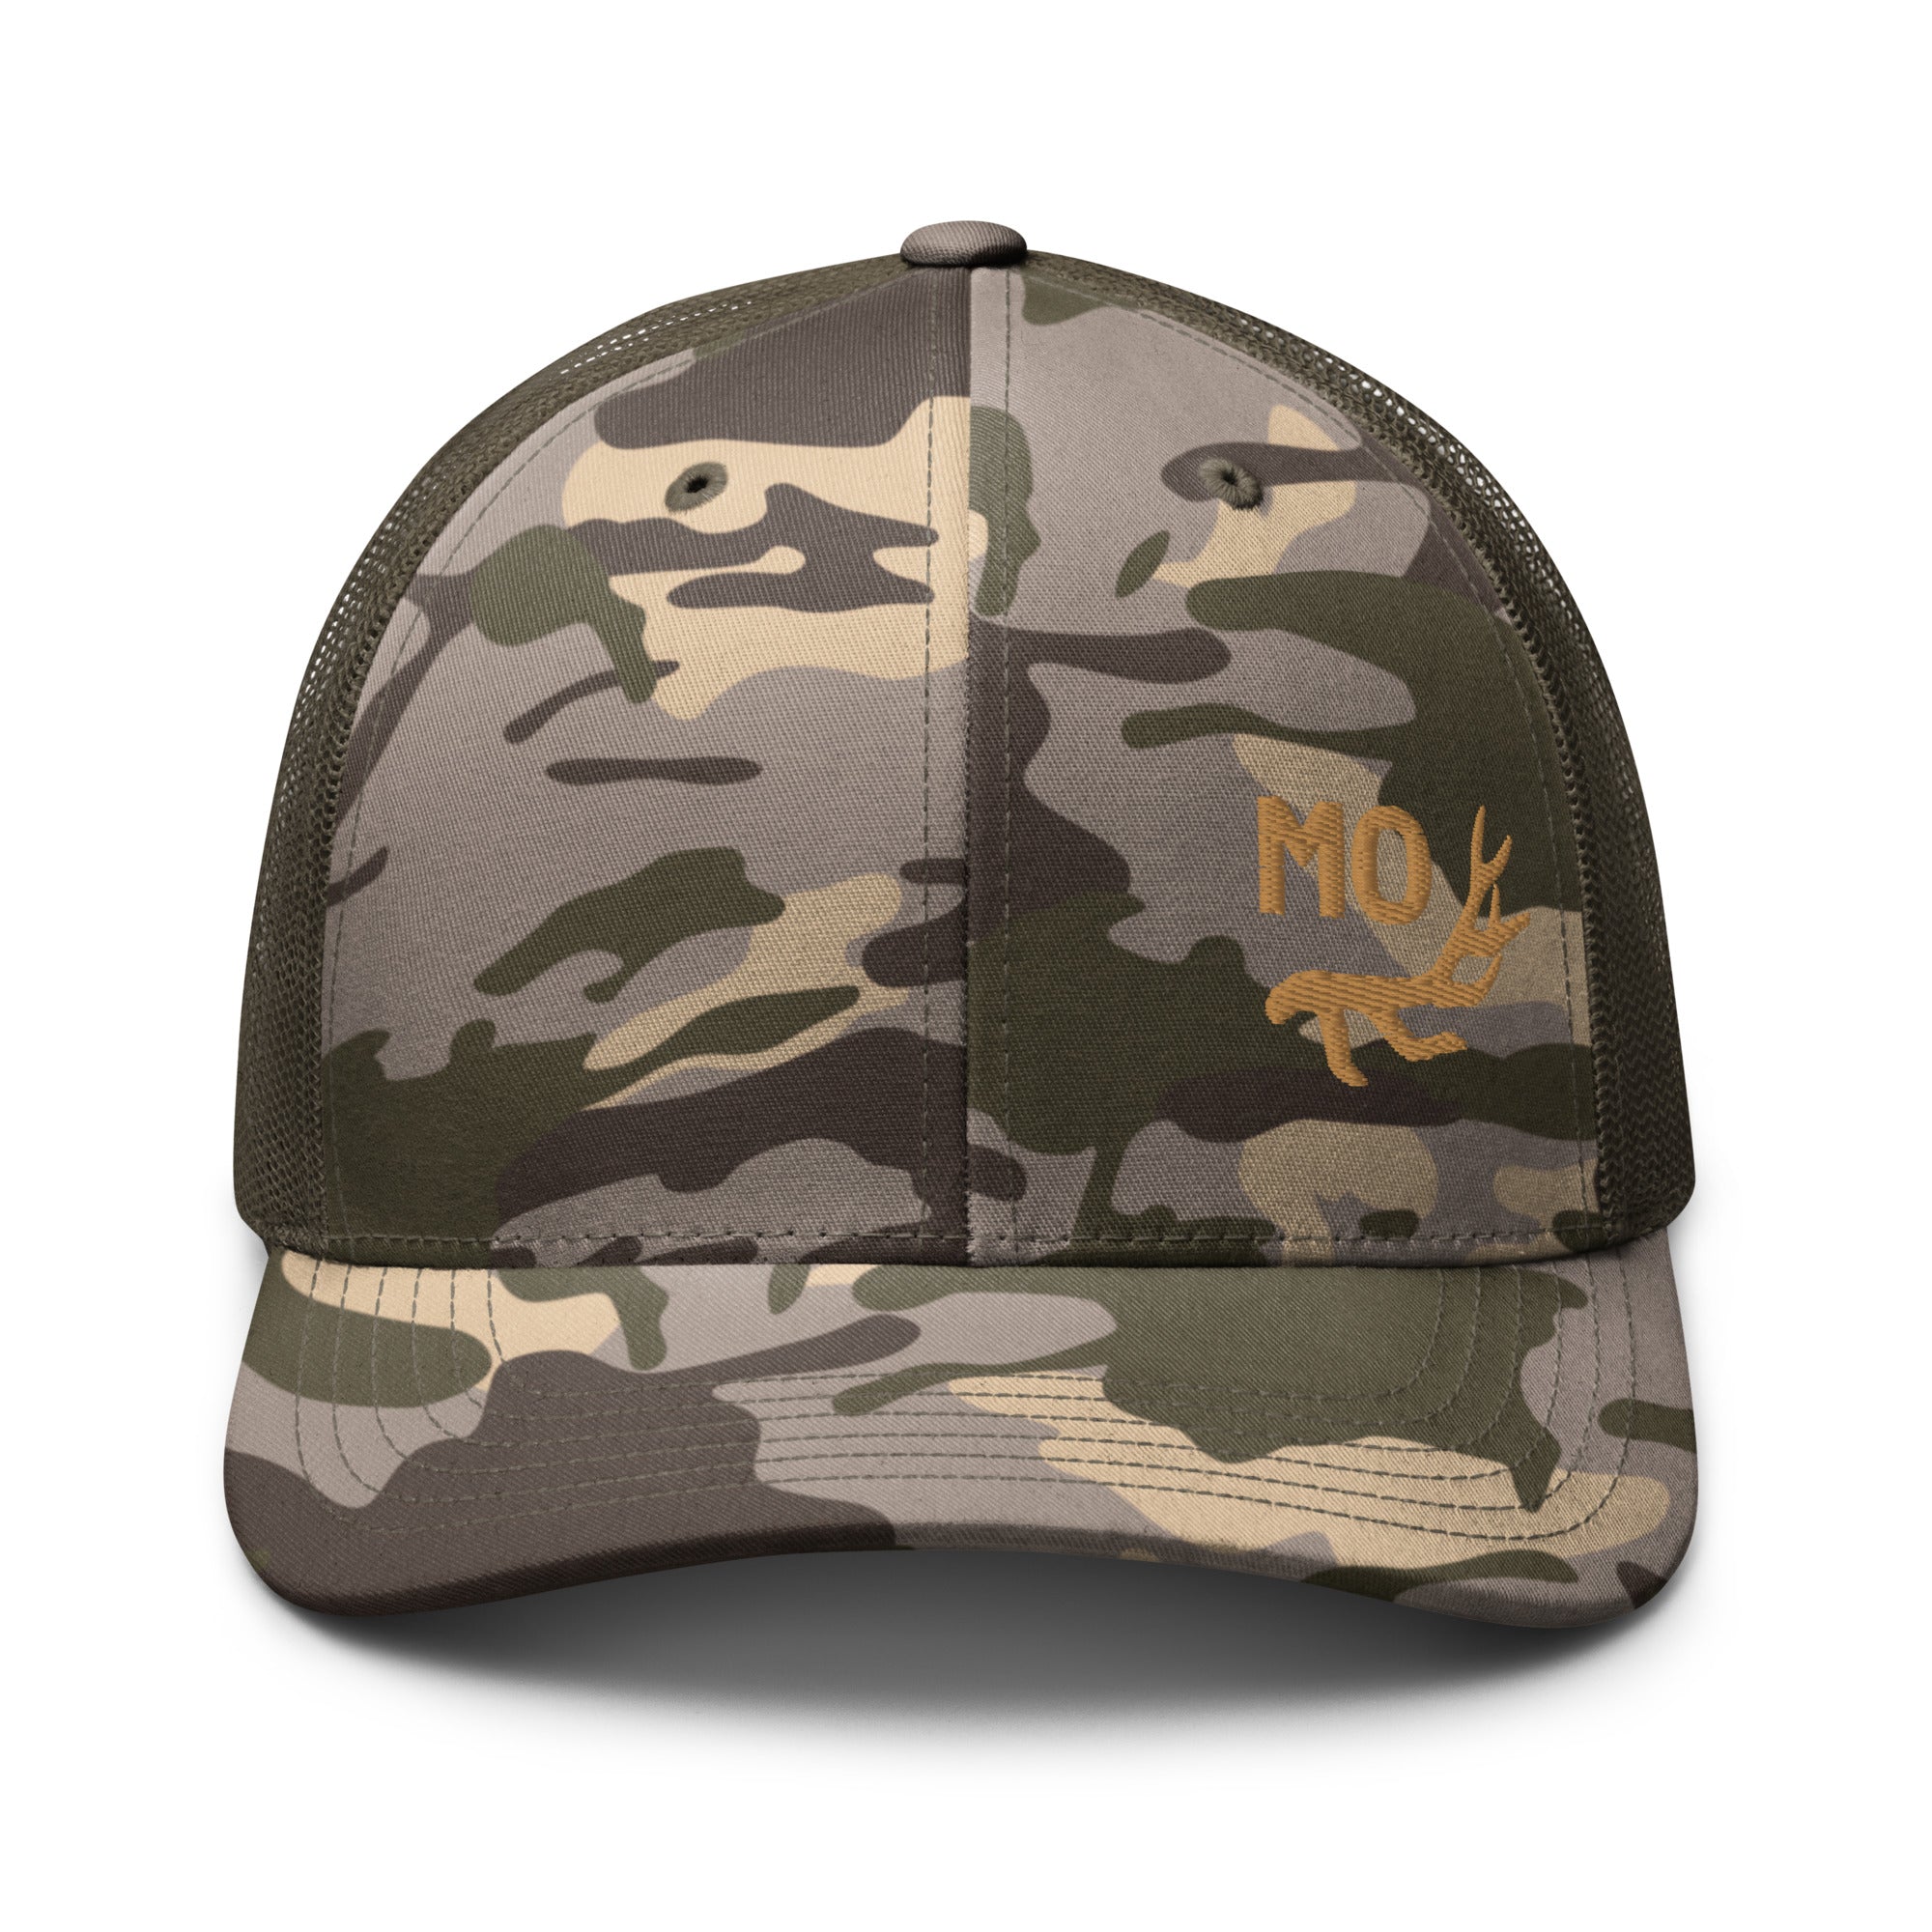 camouflage-trucker-hat-camo-olive-front-655e61d999ddc.jpg